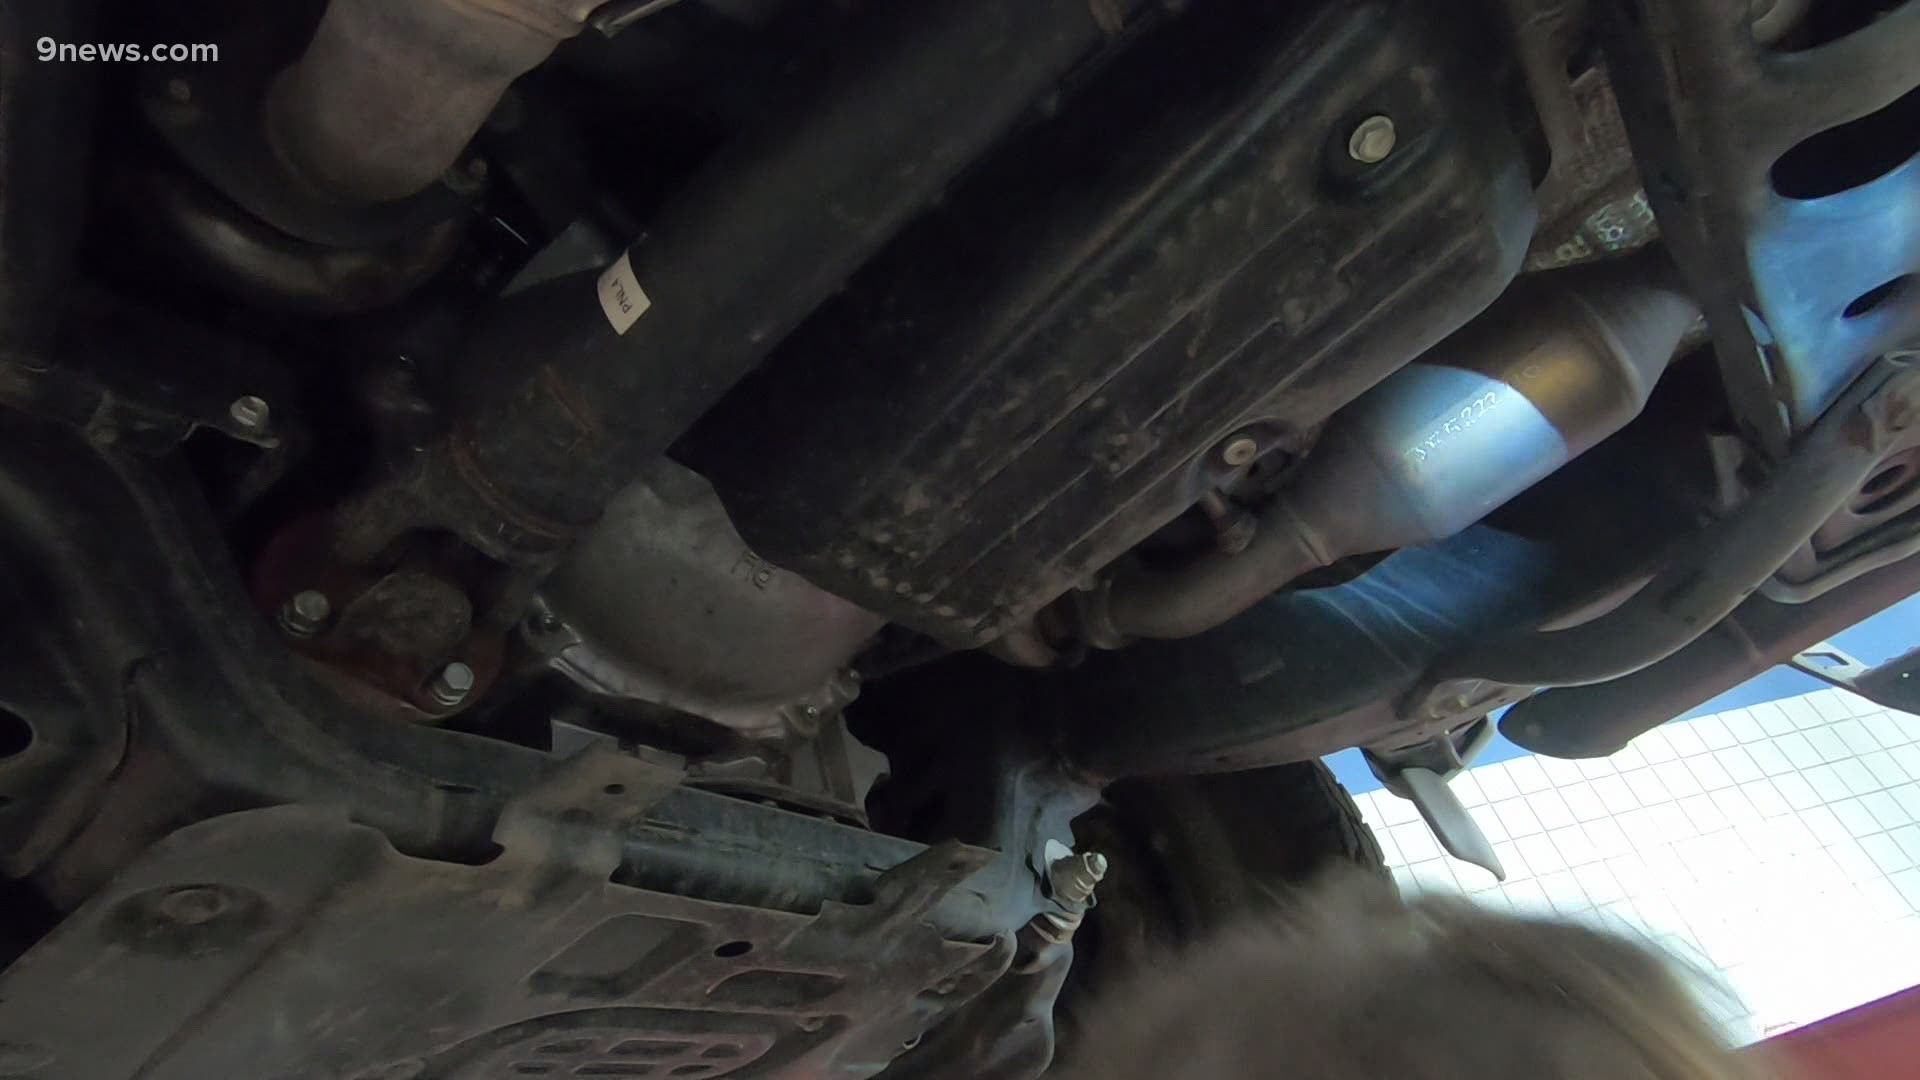 Catalytic converters have a small amount of metals that can be worth thousands of dollars.